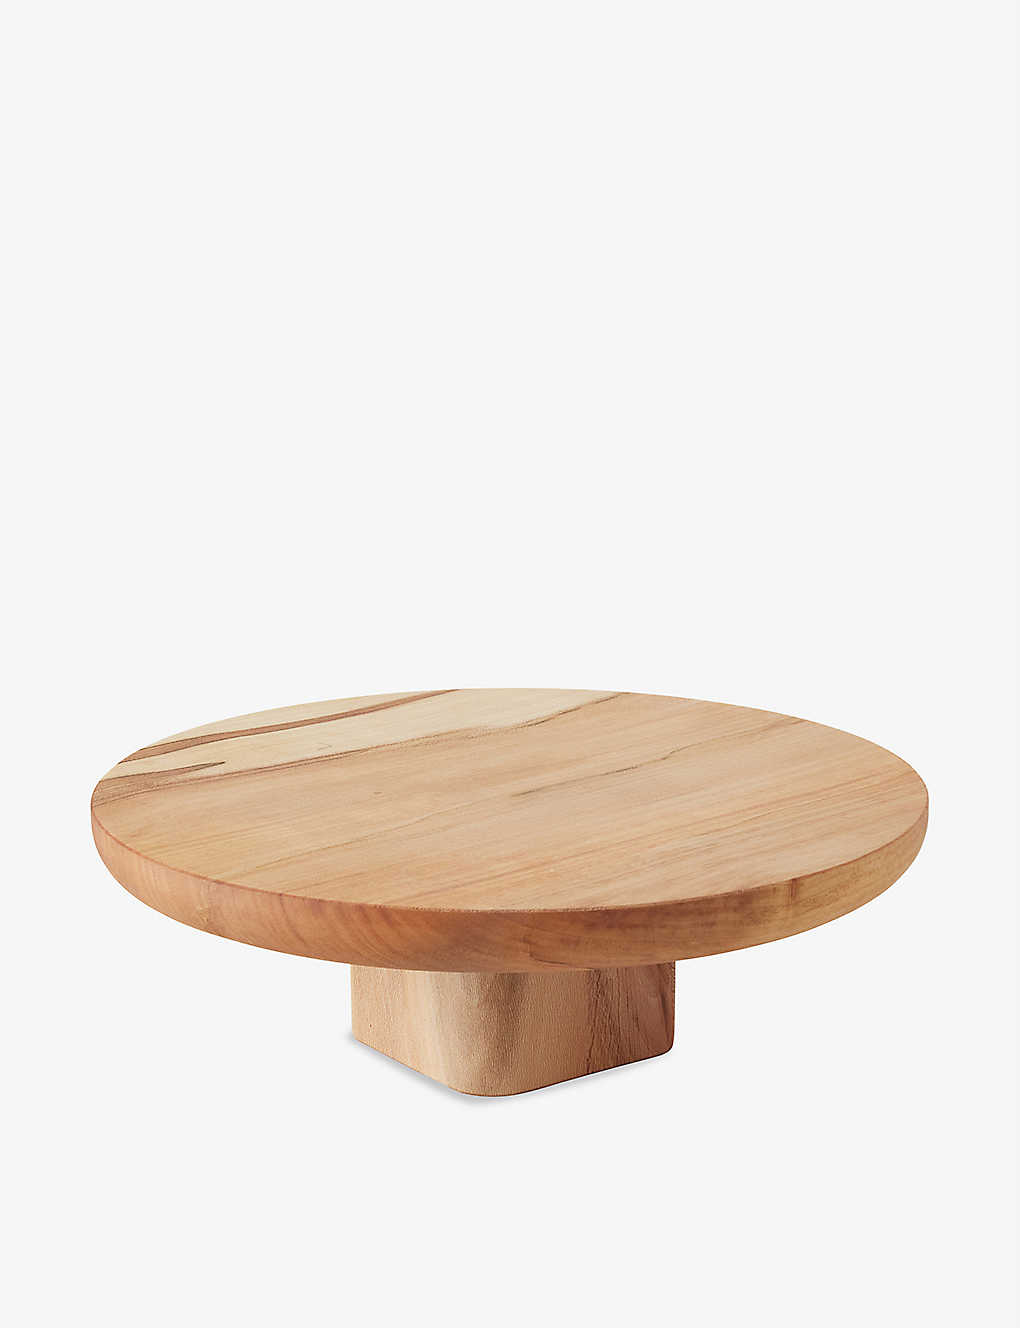 Goldfinger Grained Limited-edition Upcycled-wood Cake Stand 38cm